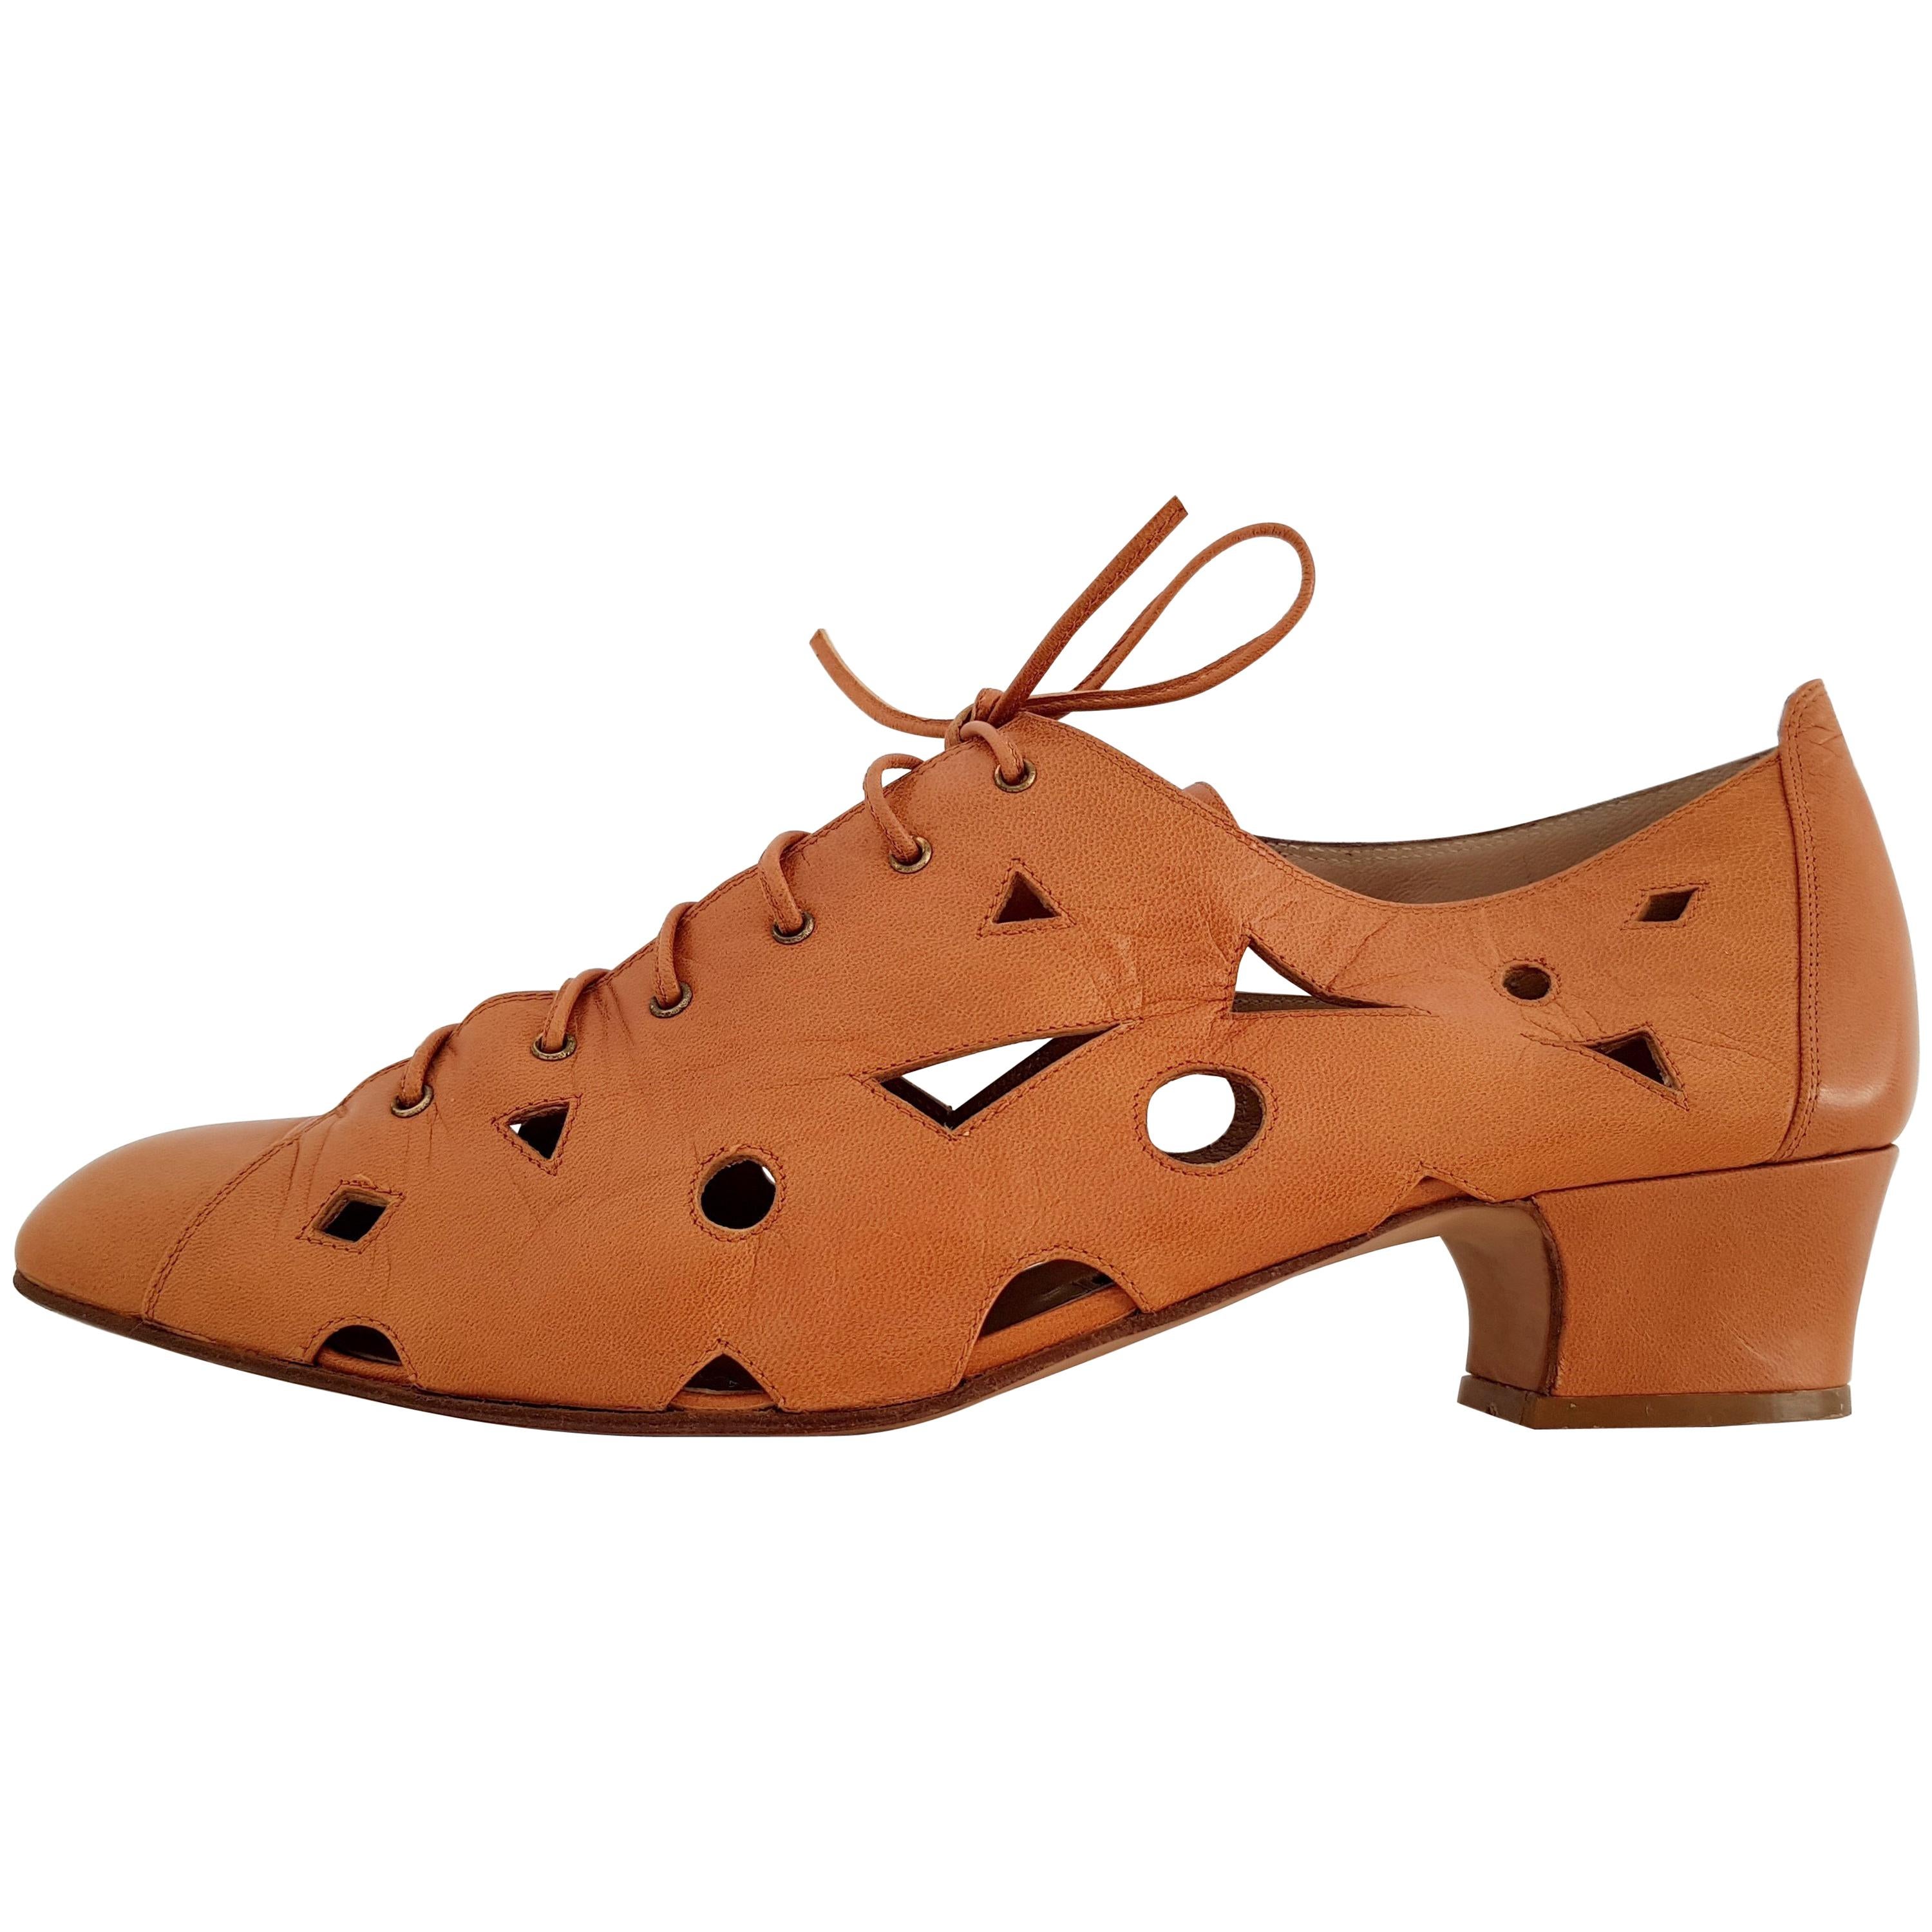 Maud Frizon Caramel Leather Hollowed Design Shoes. Size 10 For Sale